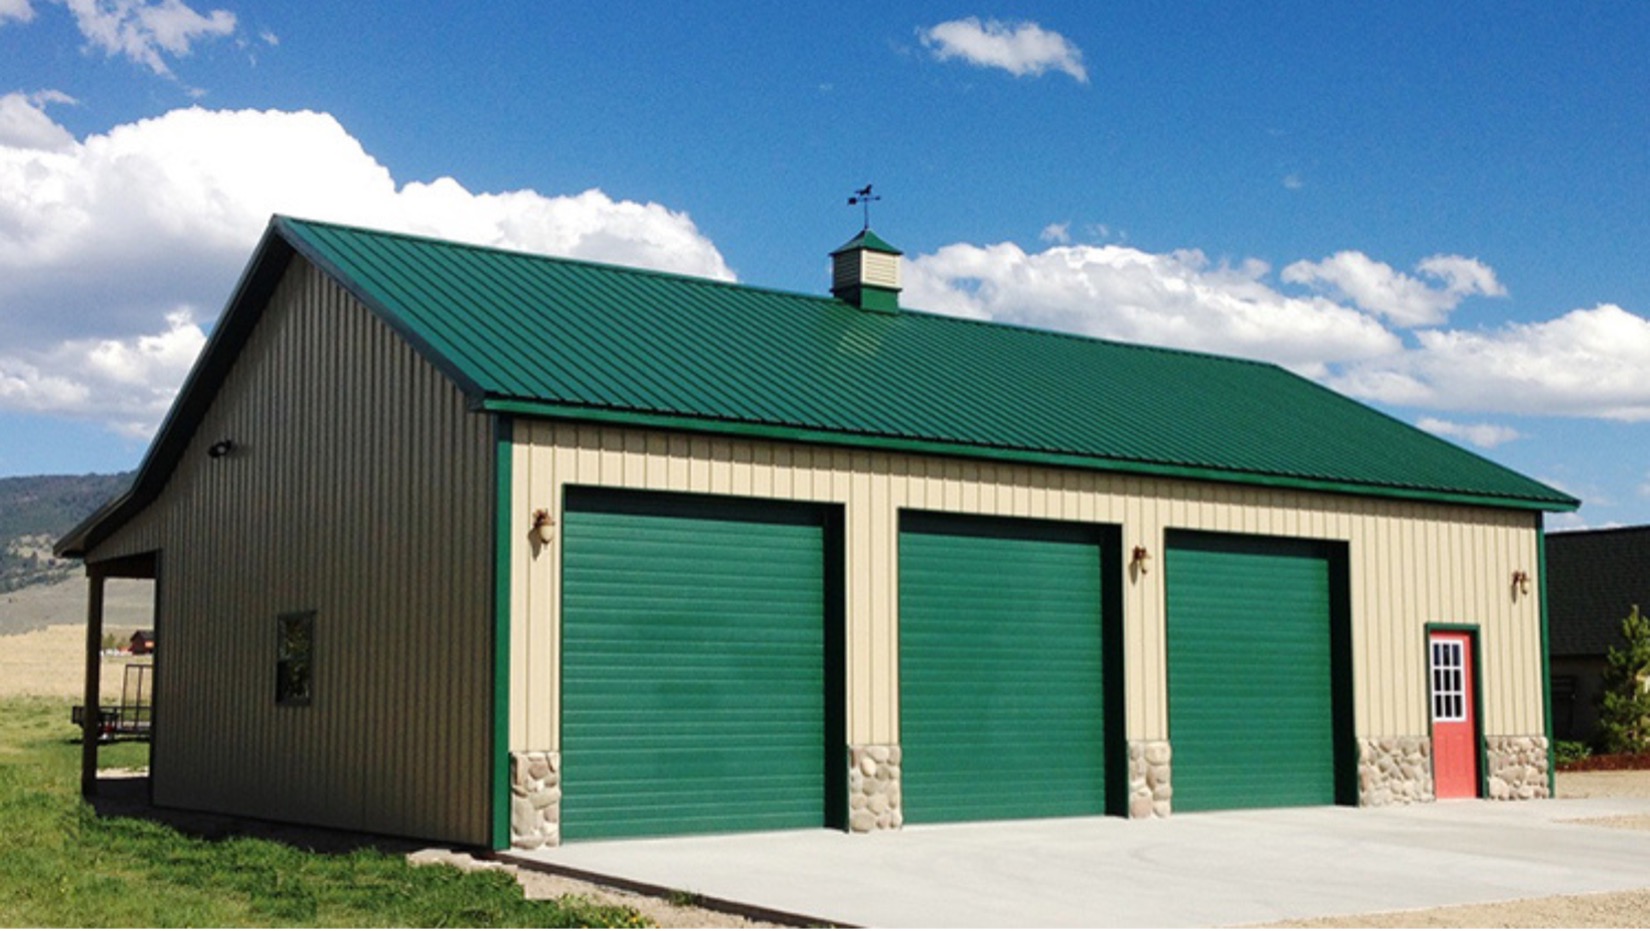 7 Design Tips for a Vehicle Garage in Chewelah